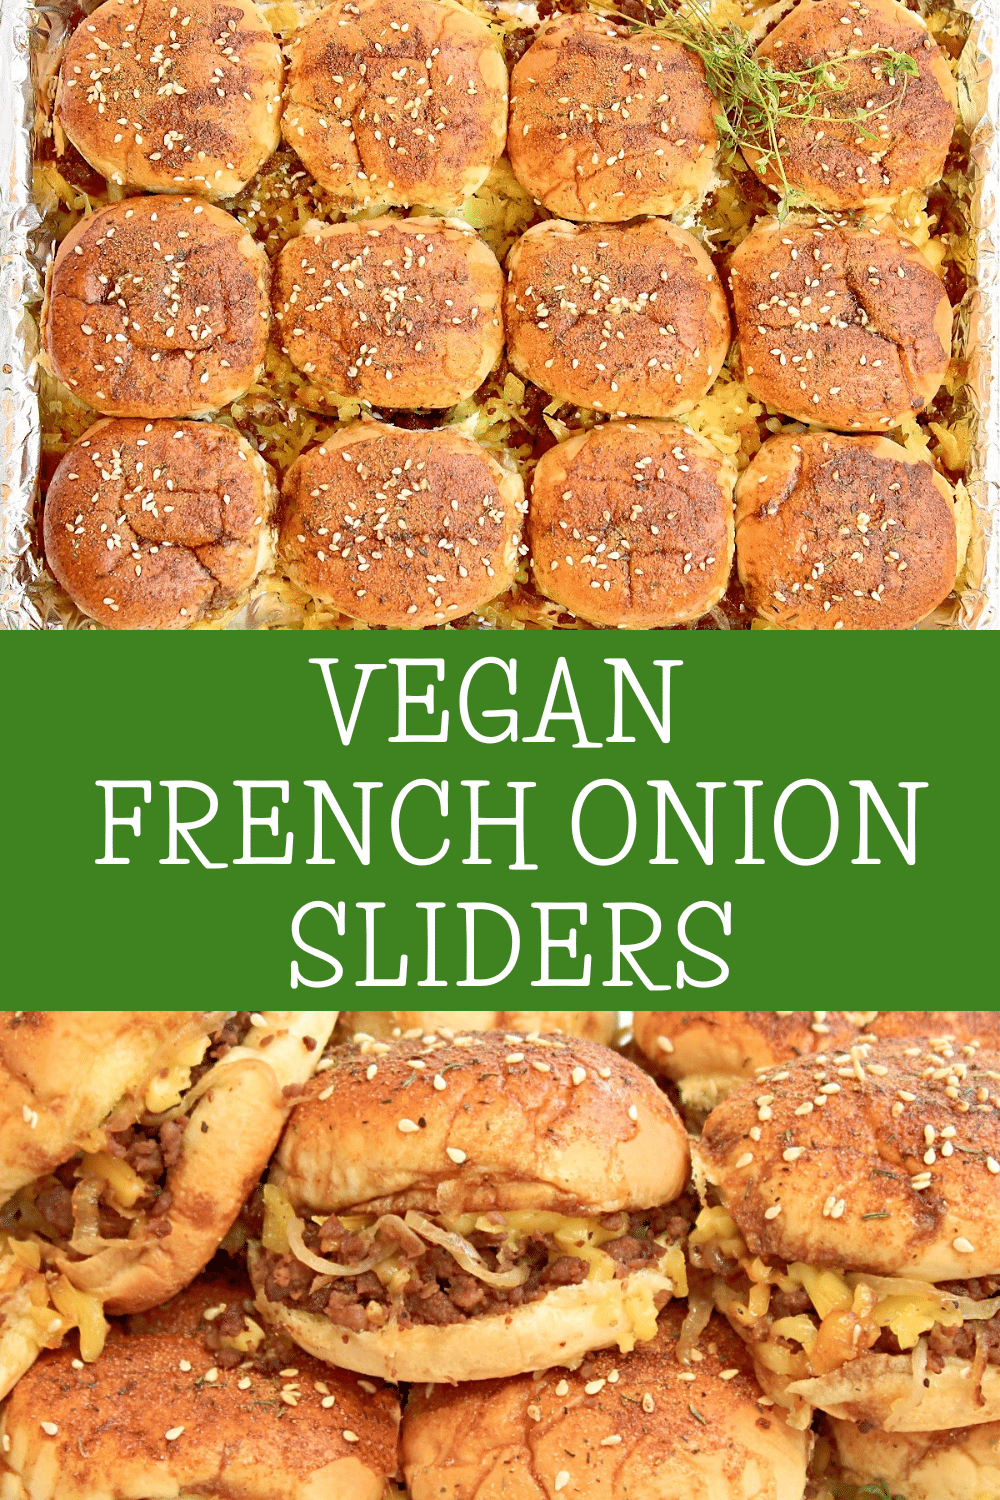 French Onion Sliders ~ Vegan beef sliders with sweet caramelized onions. Serve as an easy weeknight dinner or Game Day snack! via @thiswifecooks